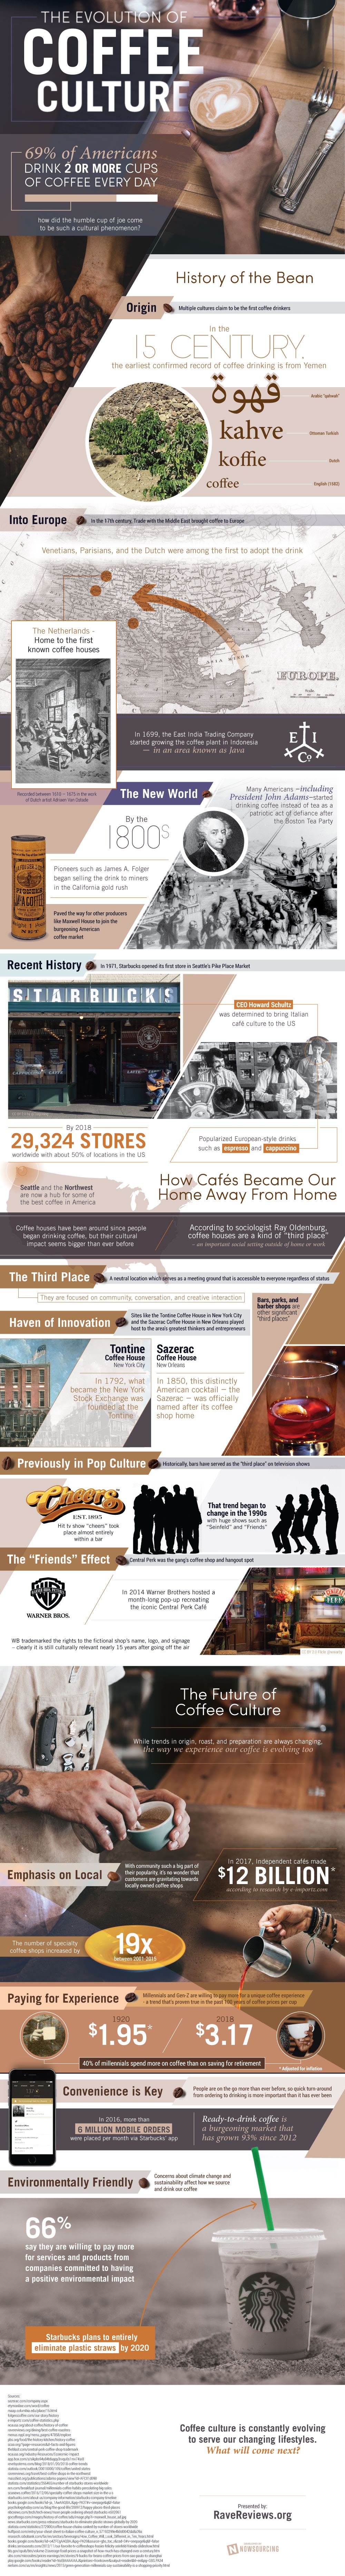 The Evolution Of Coffee Culture #infographic